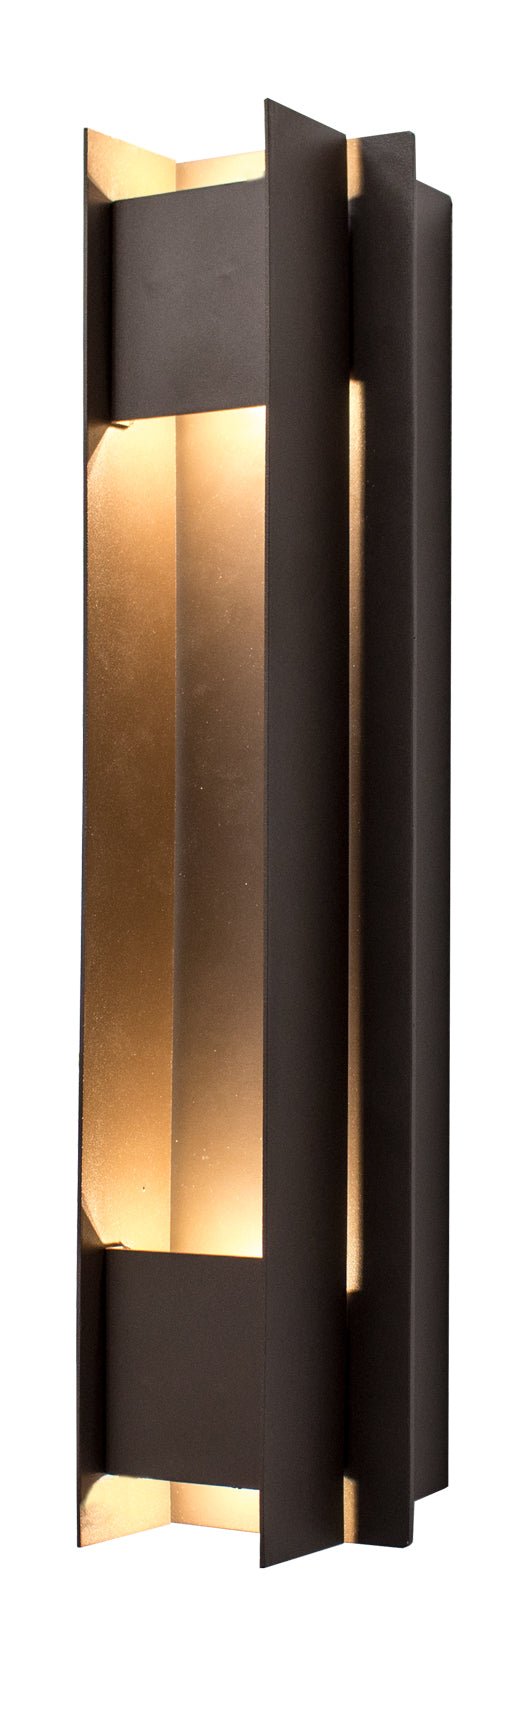 Westgate Passage LED Wall Scone 10W,20W, Bronze,Silver - Sonic Electric